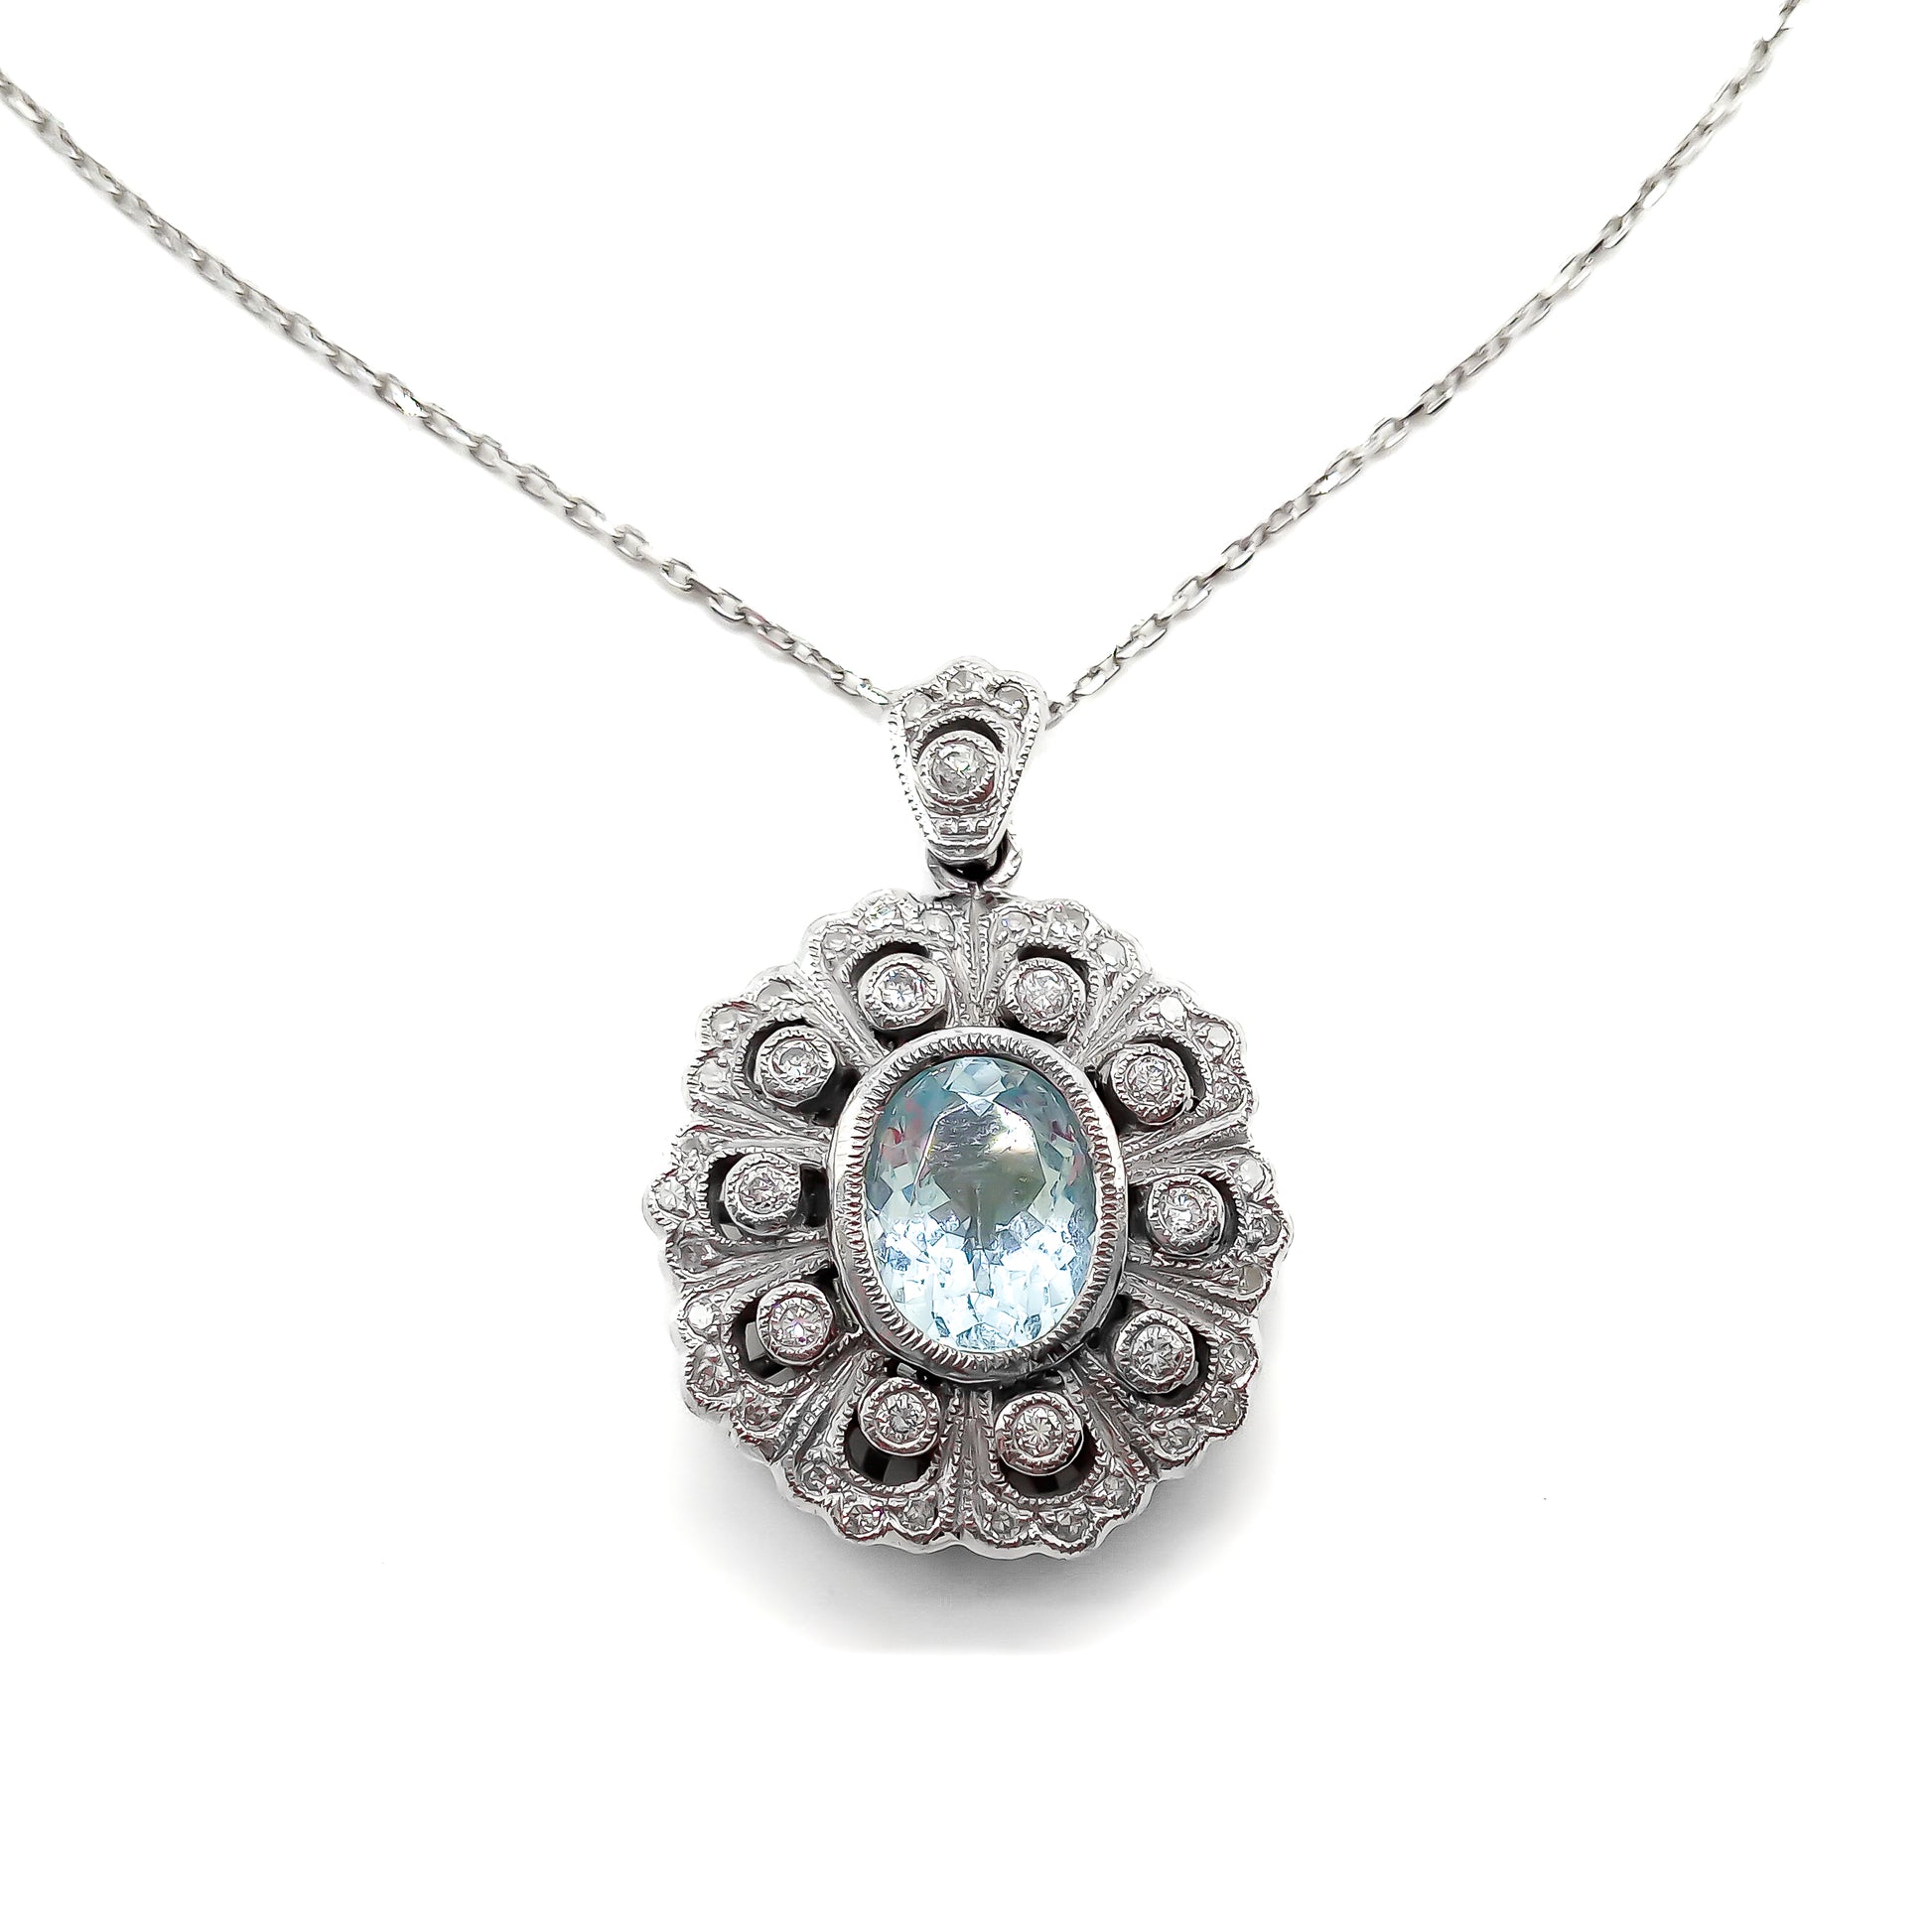 Gorgeous vintage 18ct white gold pendant set with pavé set diamonds and a beautifully faceted oval aquamarine, on an 18ct white gold chain.